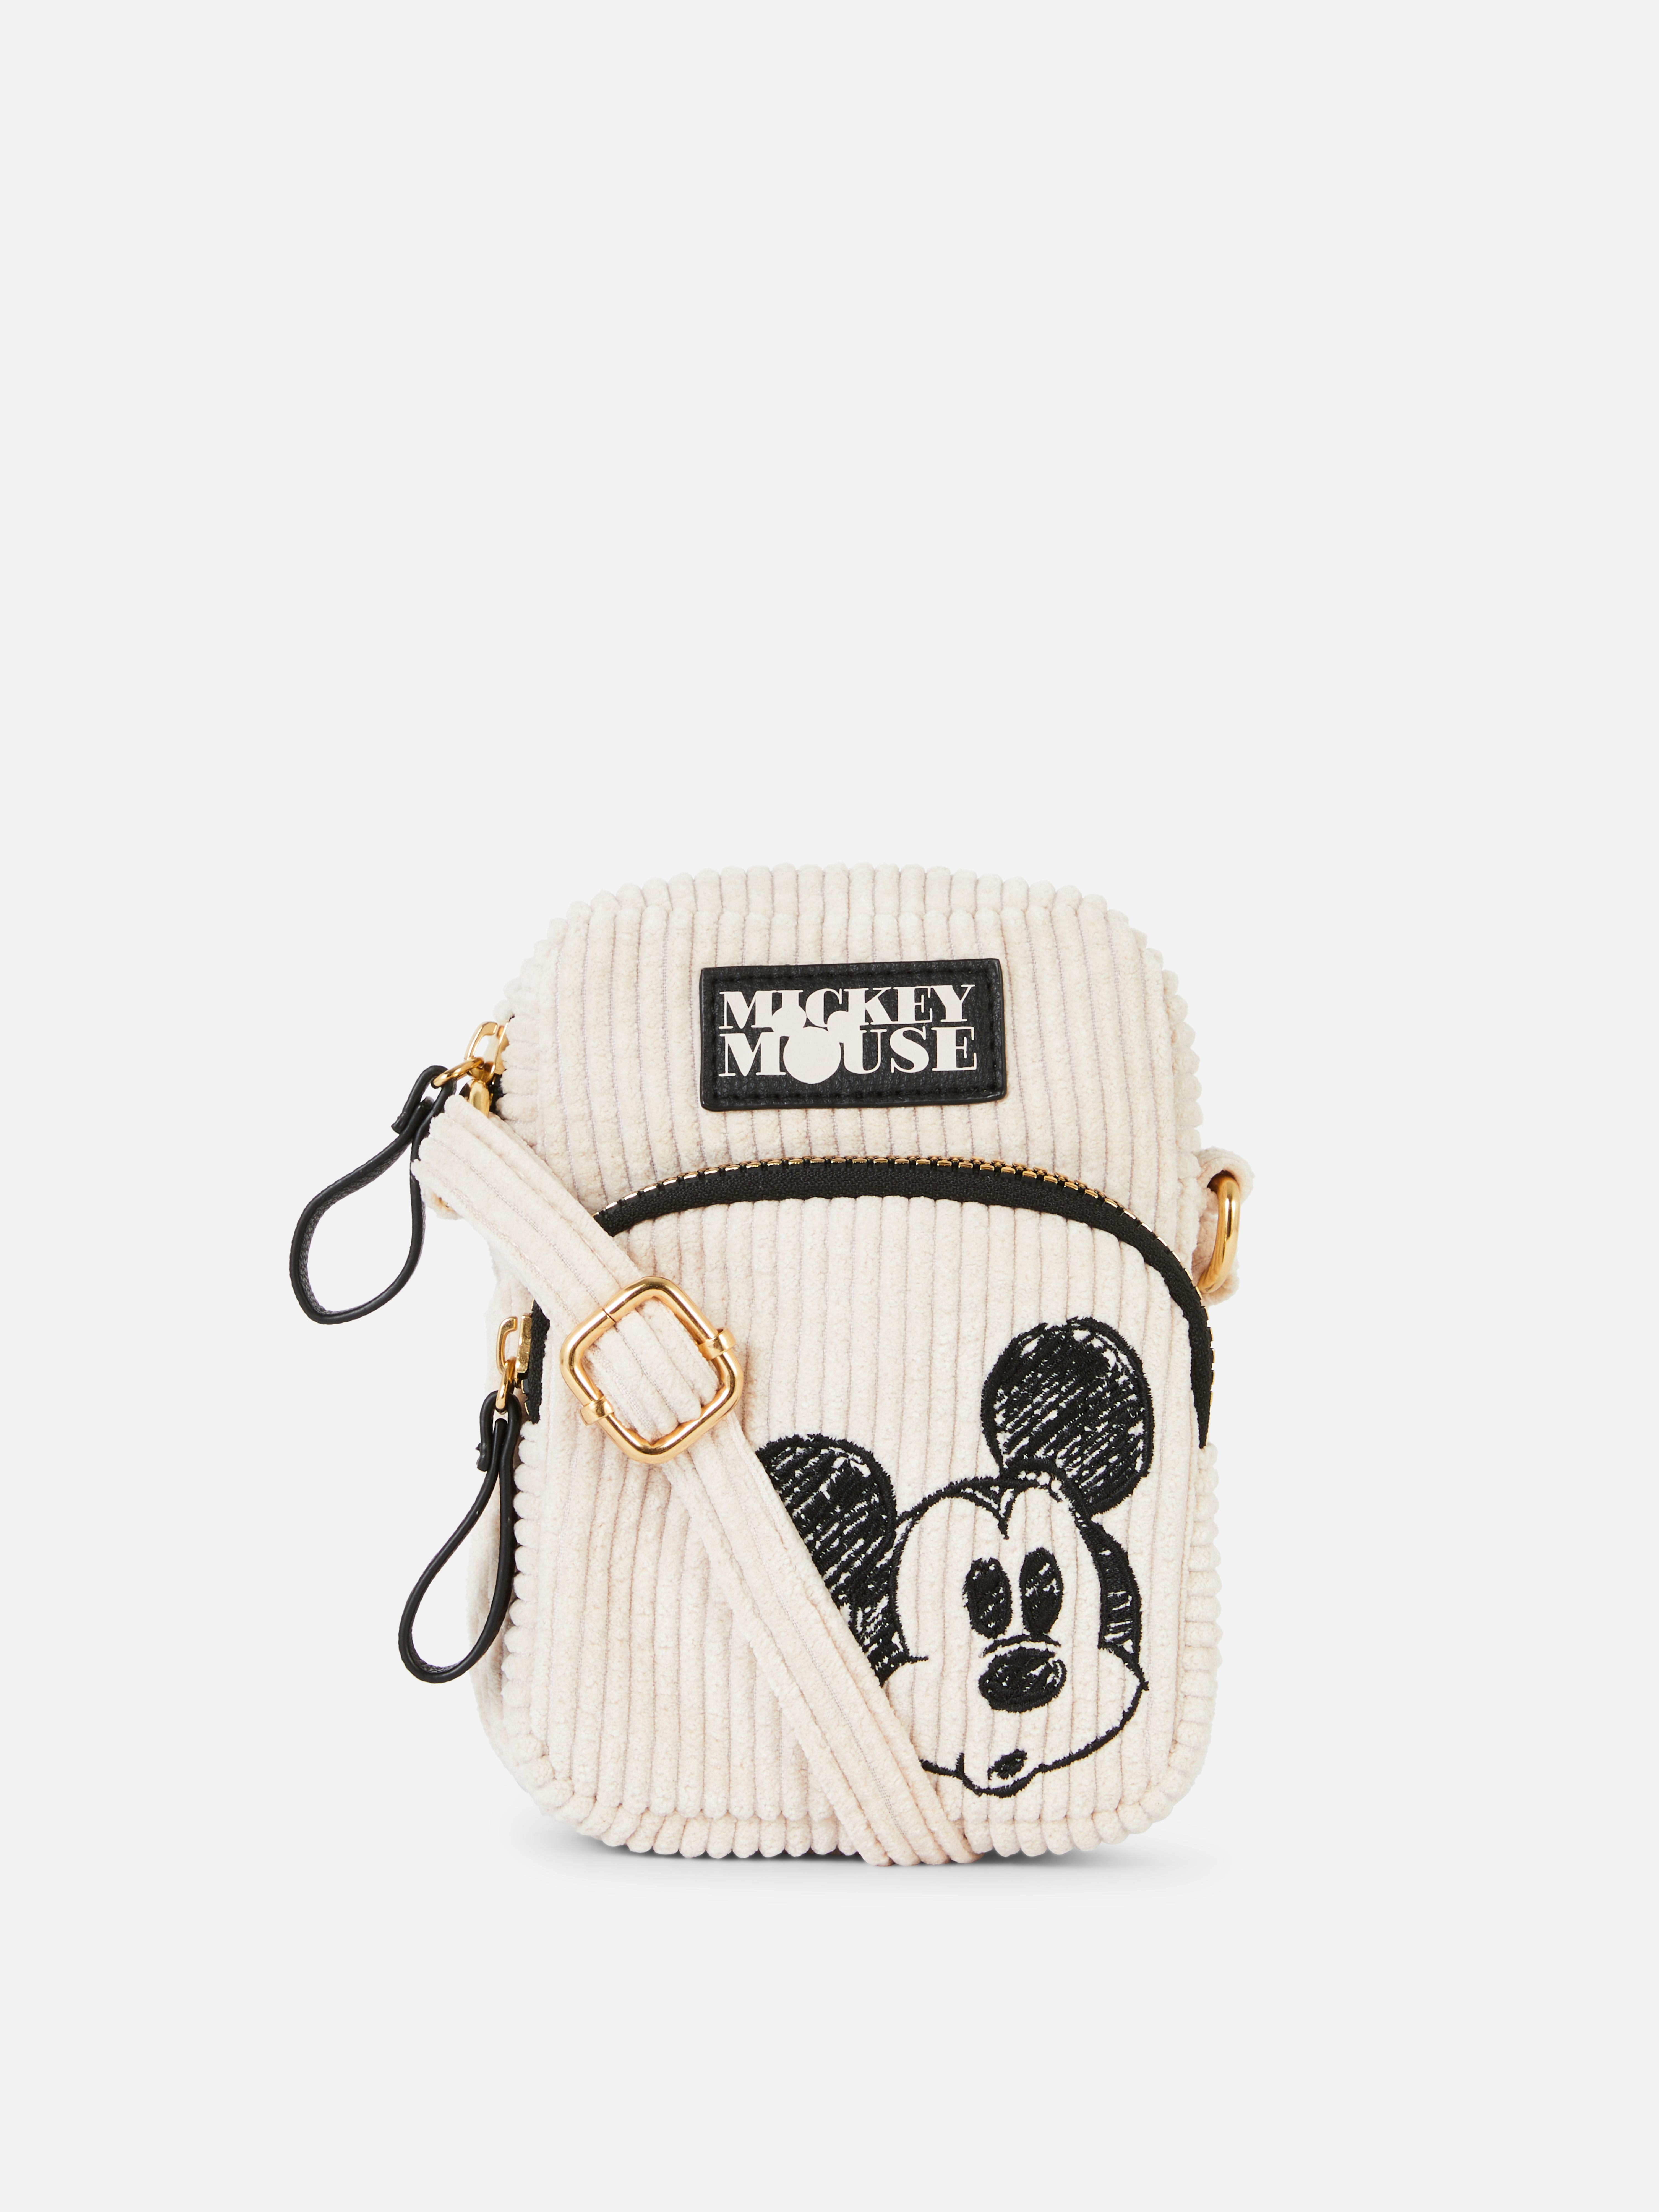 Disney’s Mickey Mouse Phone Pouch Bag